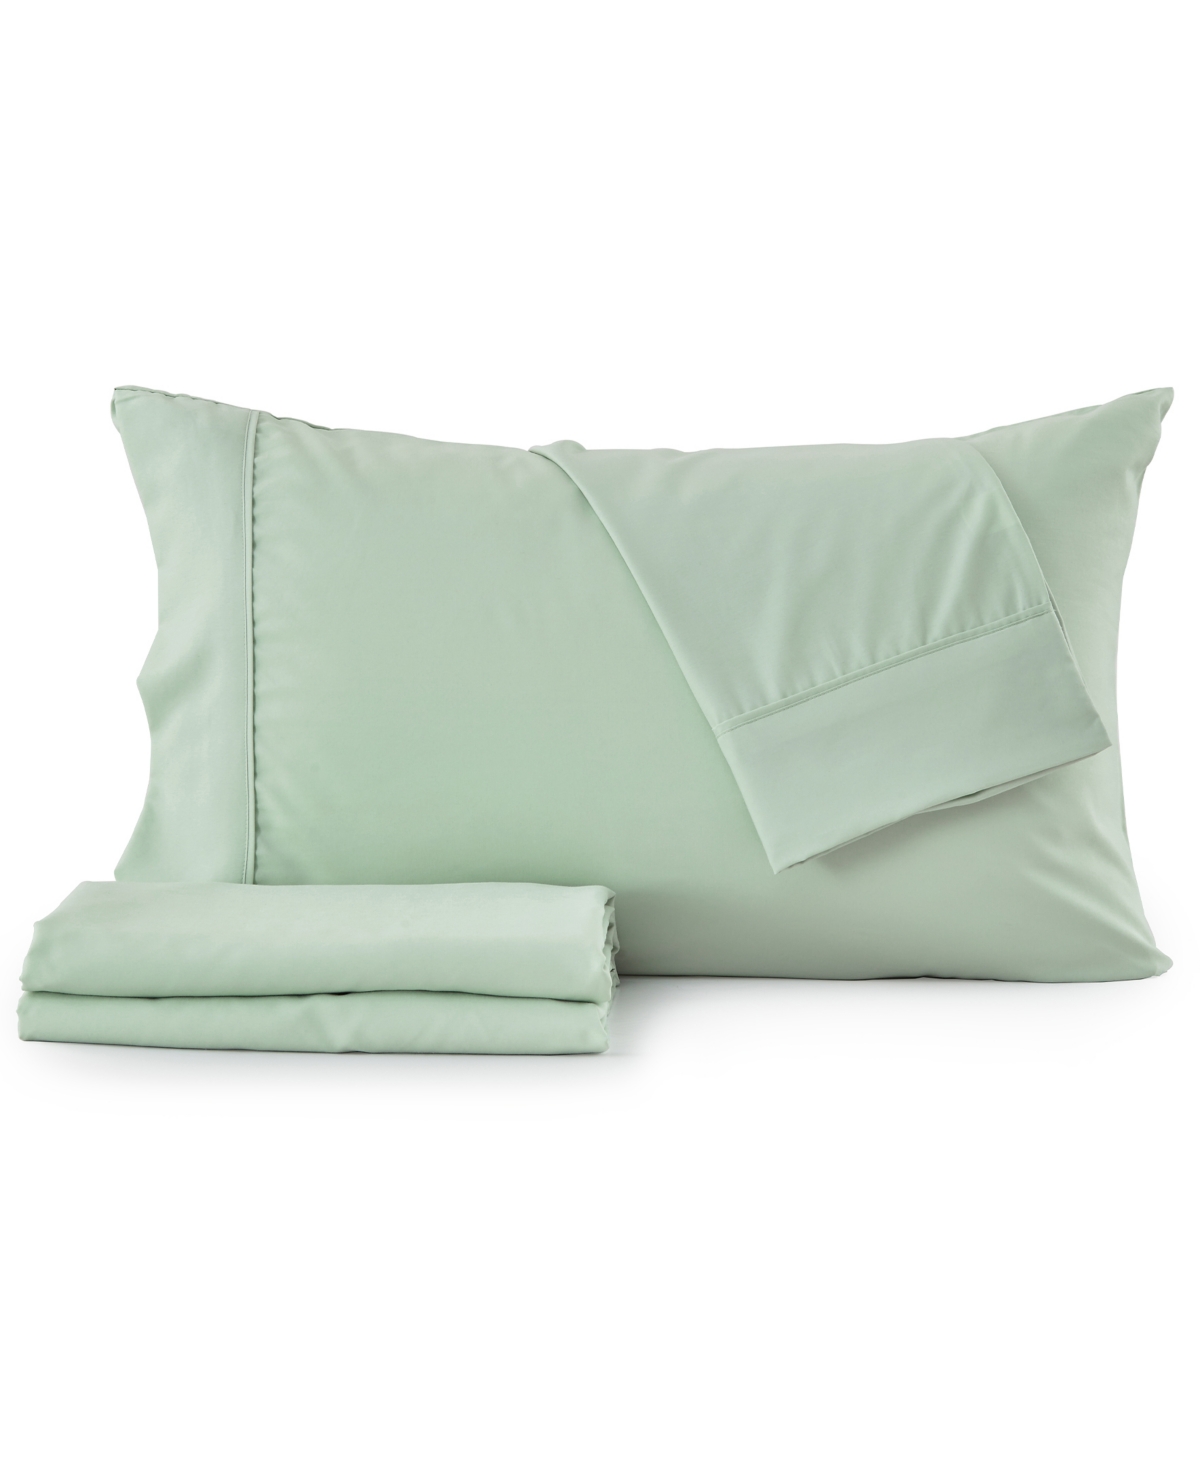 Premium Comforts Rayon From Bamboo Blend Microfiber Crease-resistant 4 Piece Sheet Set, King In Sage